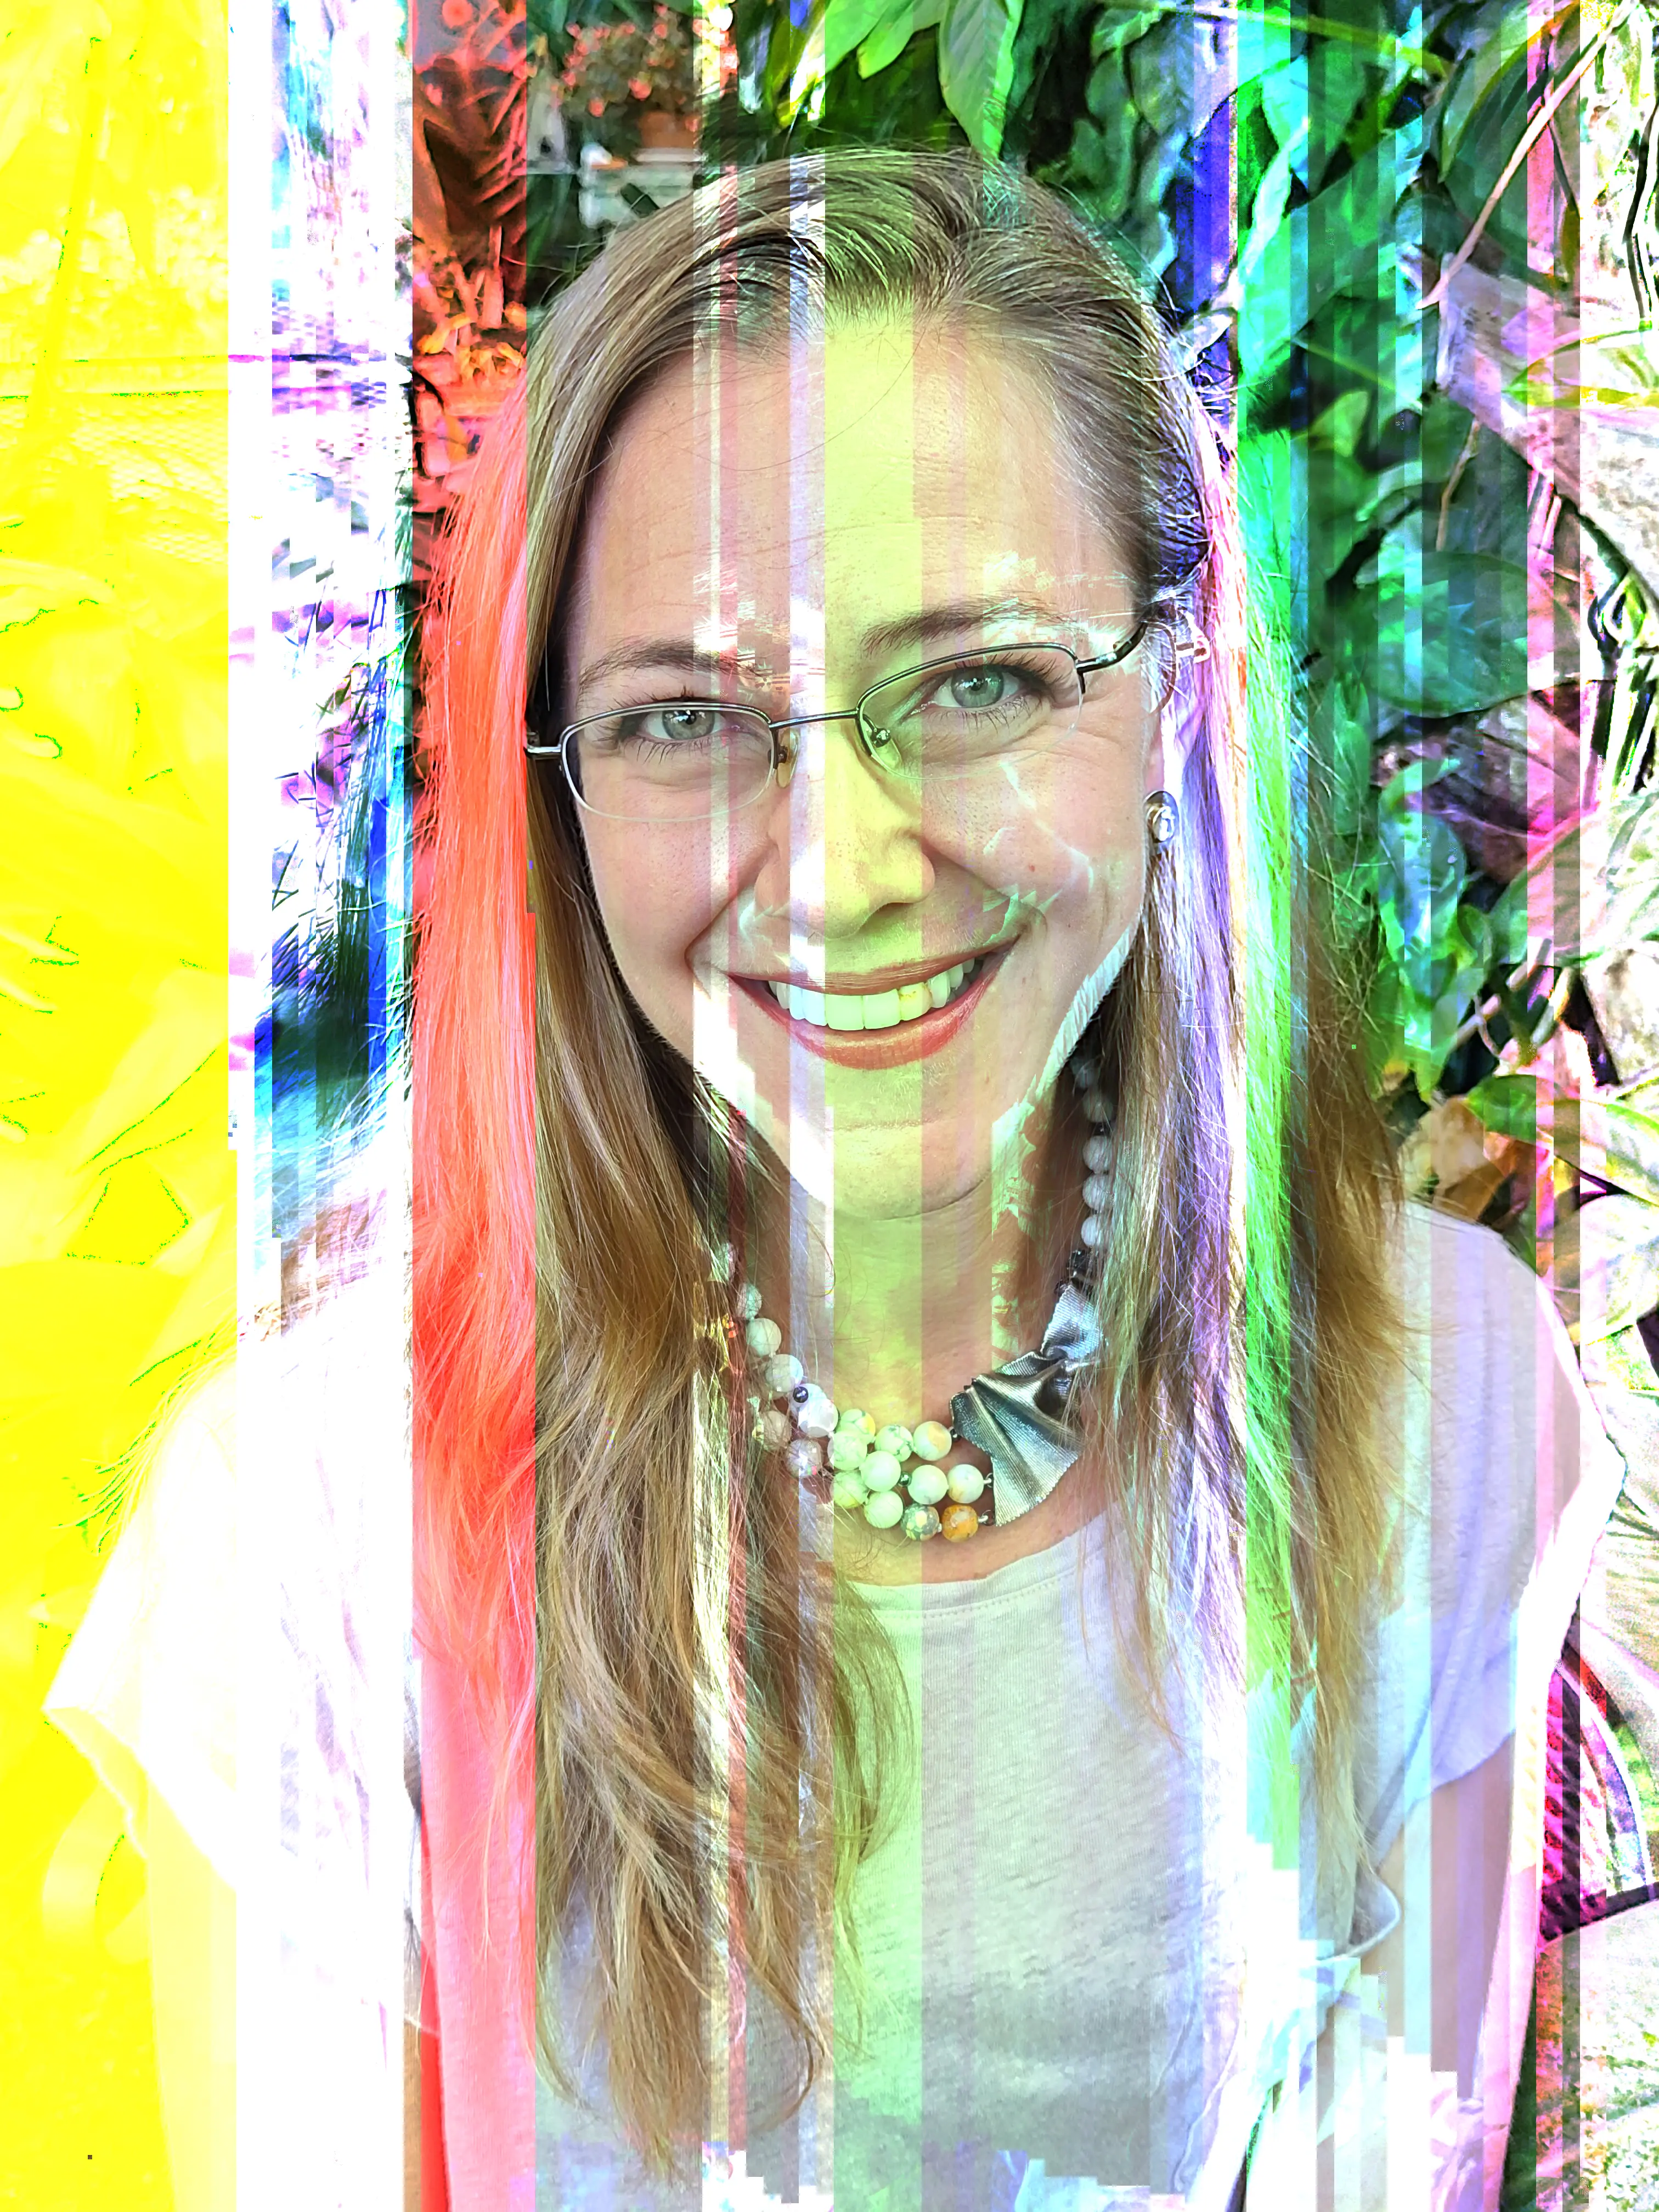 Photo of Minka Stoyanova with glasses, a smile, and large beaded necklace wearing a white shirt.